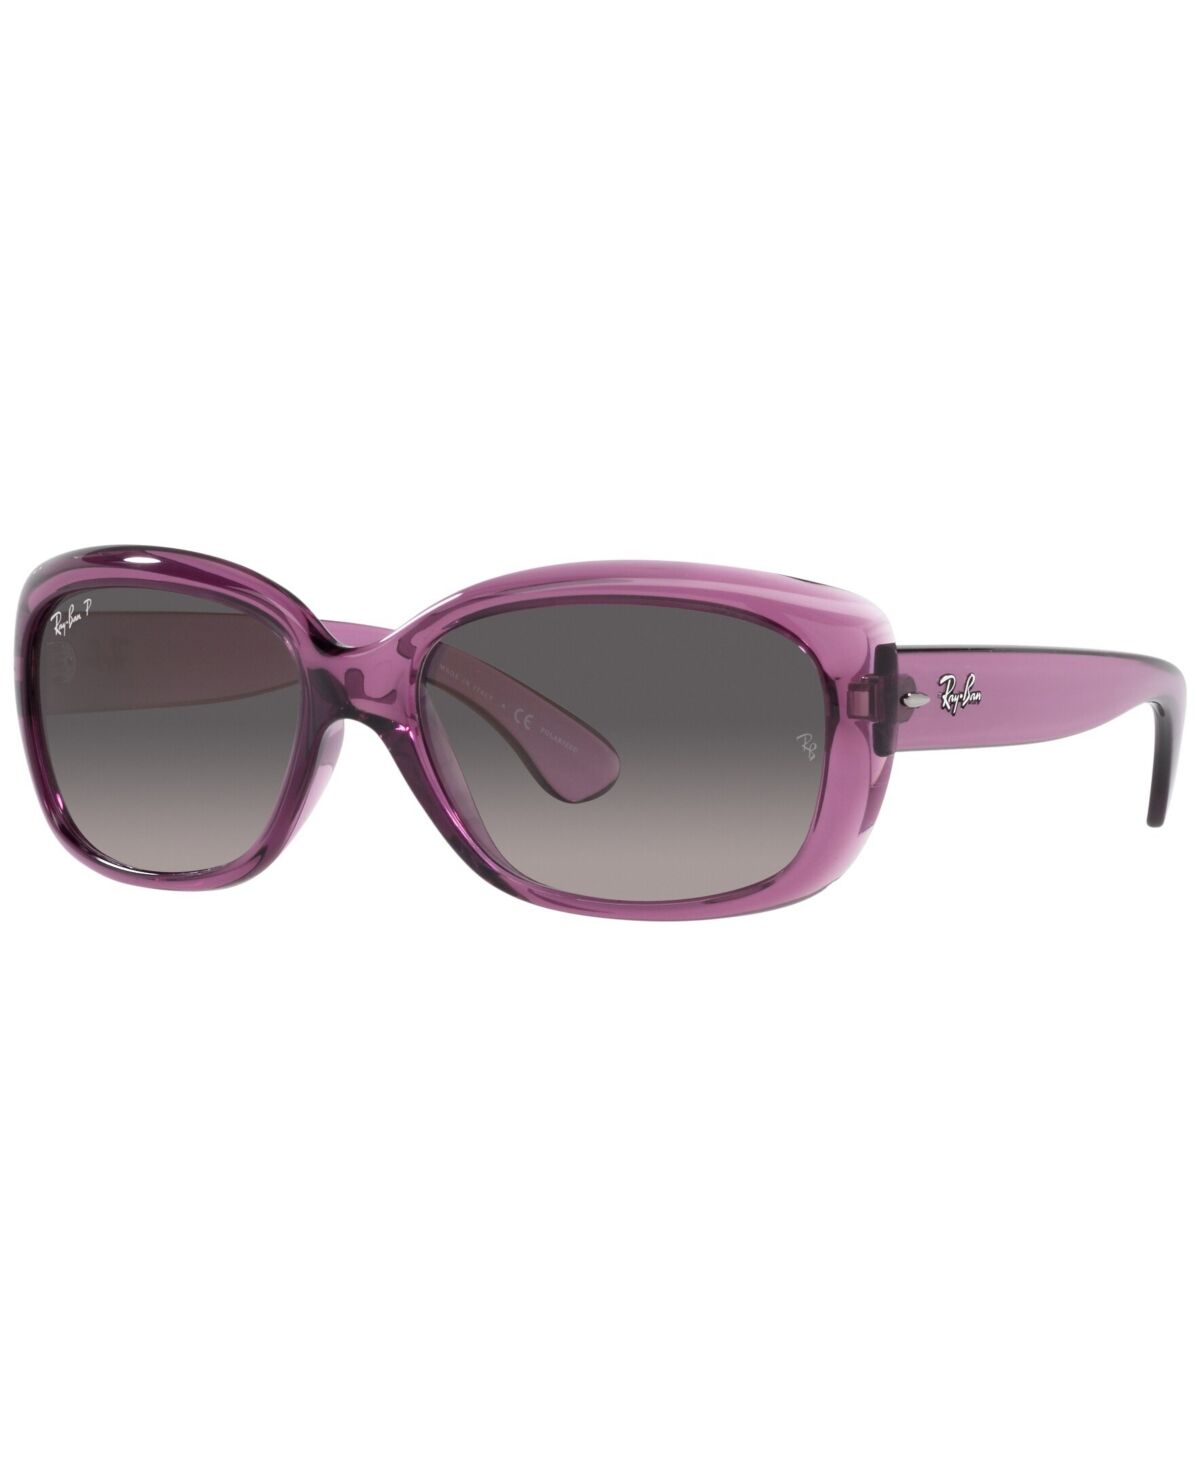 Ray-Ban Women's Polarized Sunglasses, RB4101 Jackie Ohh 58 - Transparent Violet